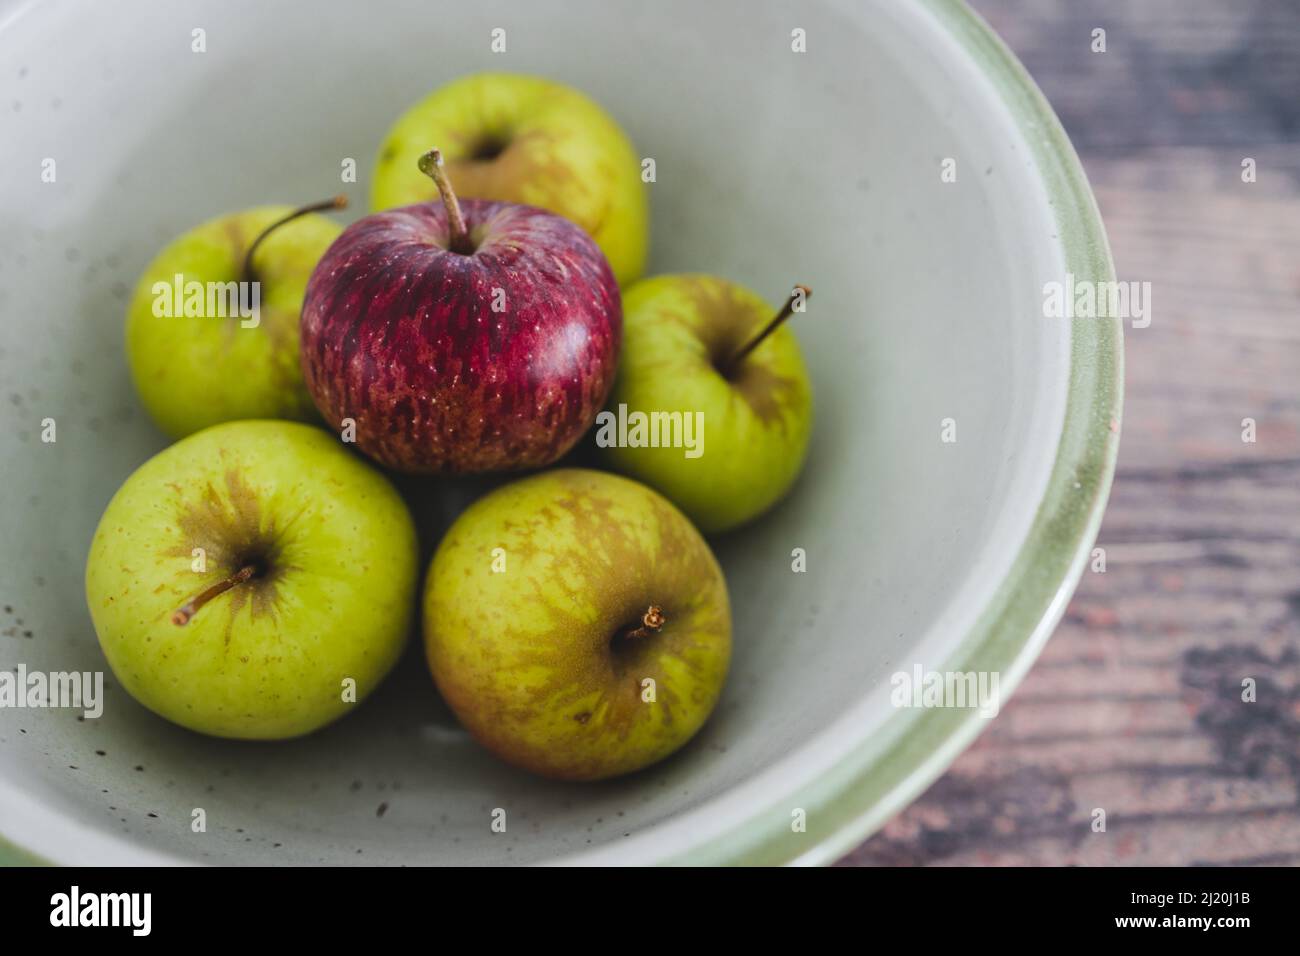 Green vs red apple: Which is healthier?